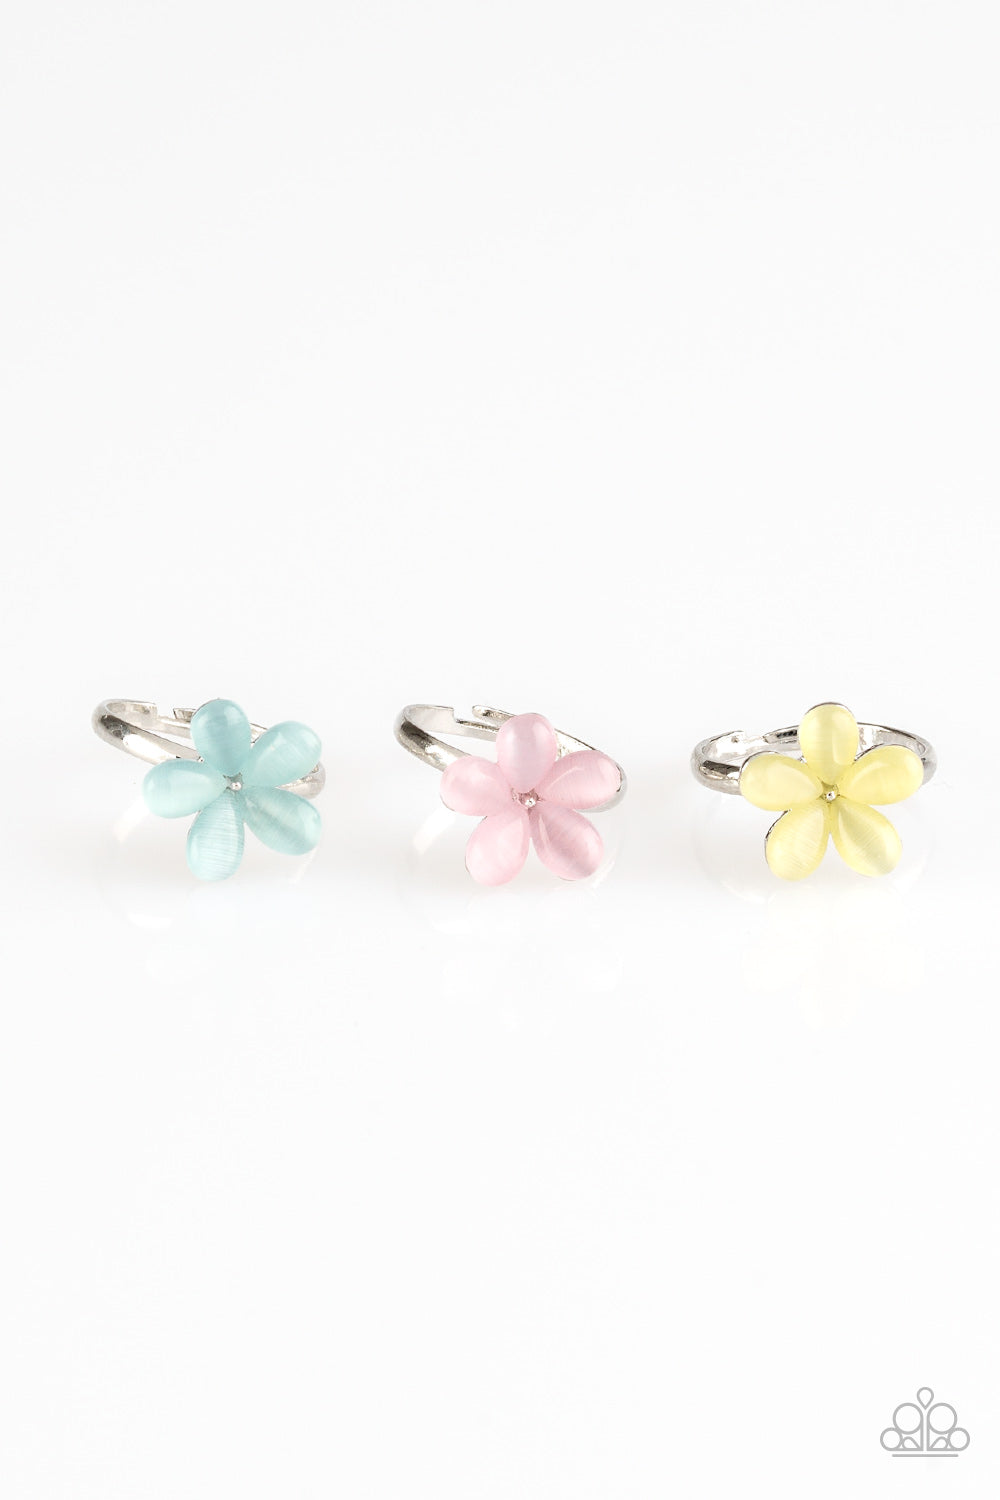 Paparazzi Starlet Shimmer Rings - 10 - Green, Pink, Yellow, Blue - Hawaiian Moonstone Flowers - $5 Jewelry With Ashley Swint